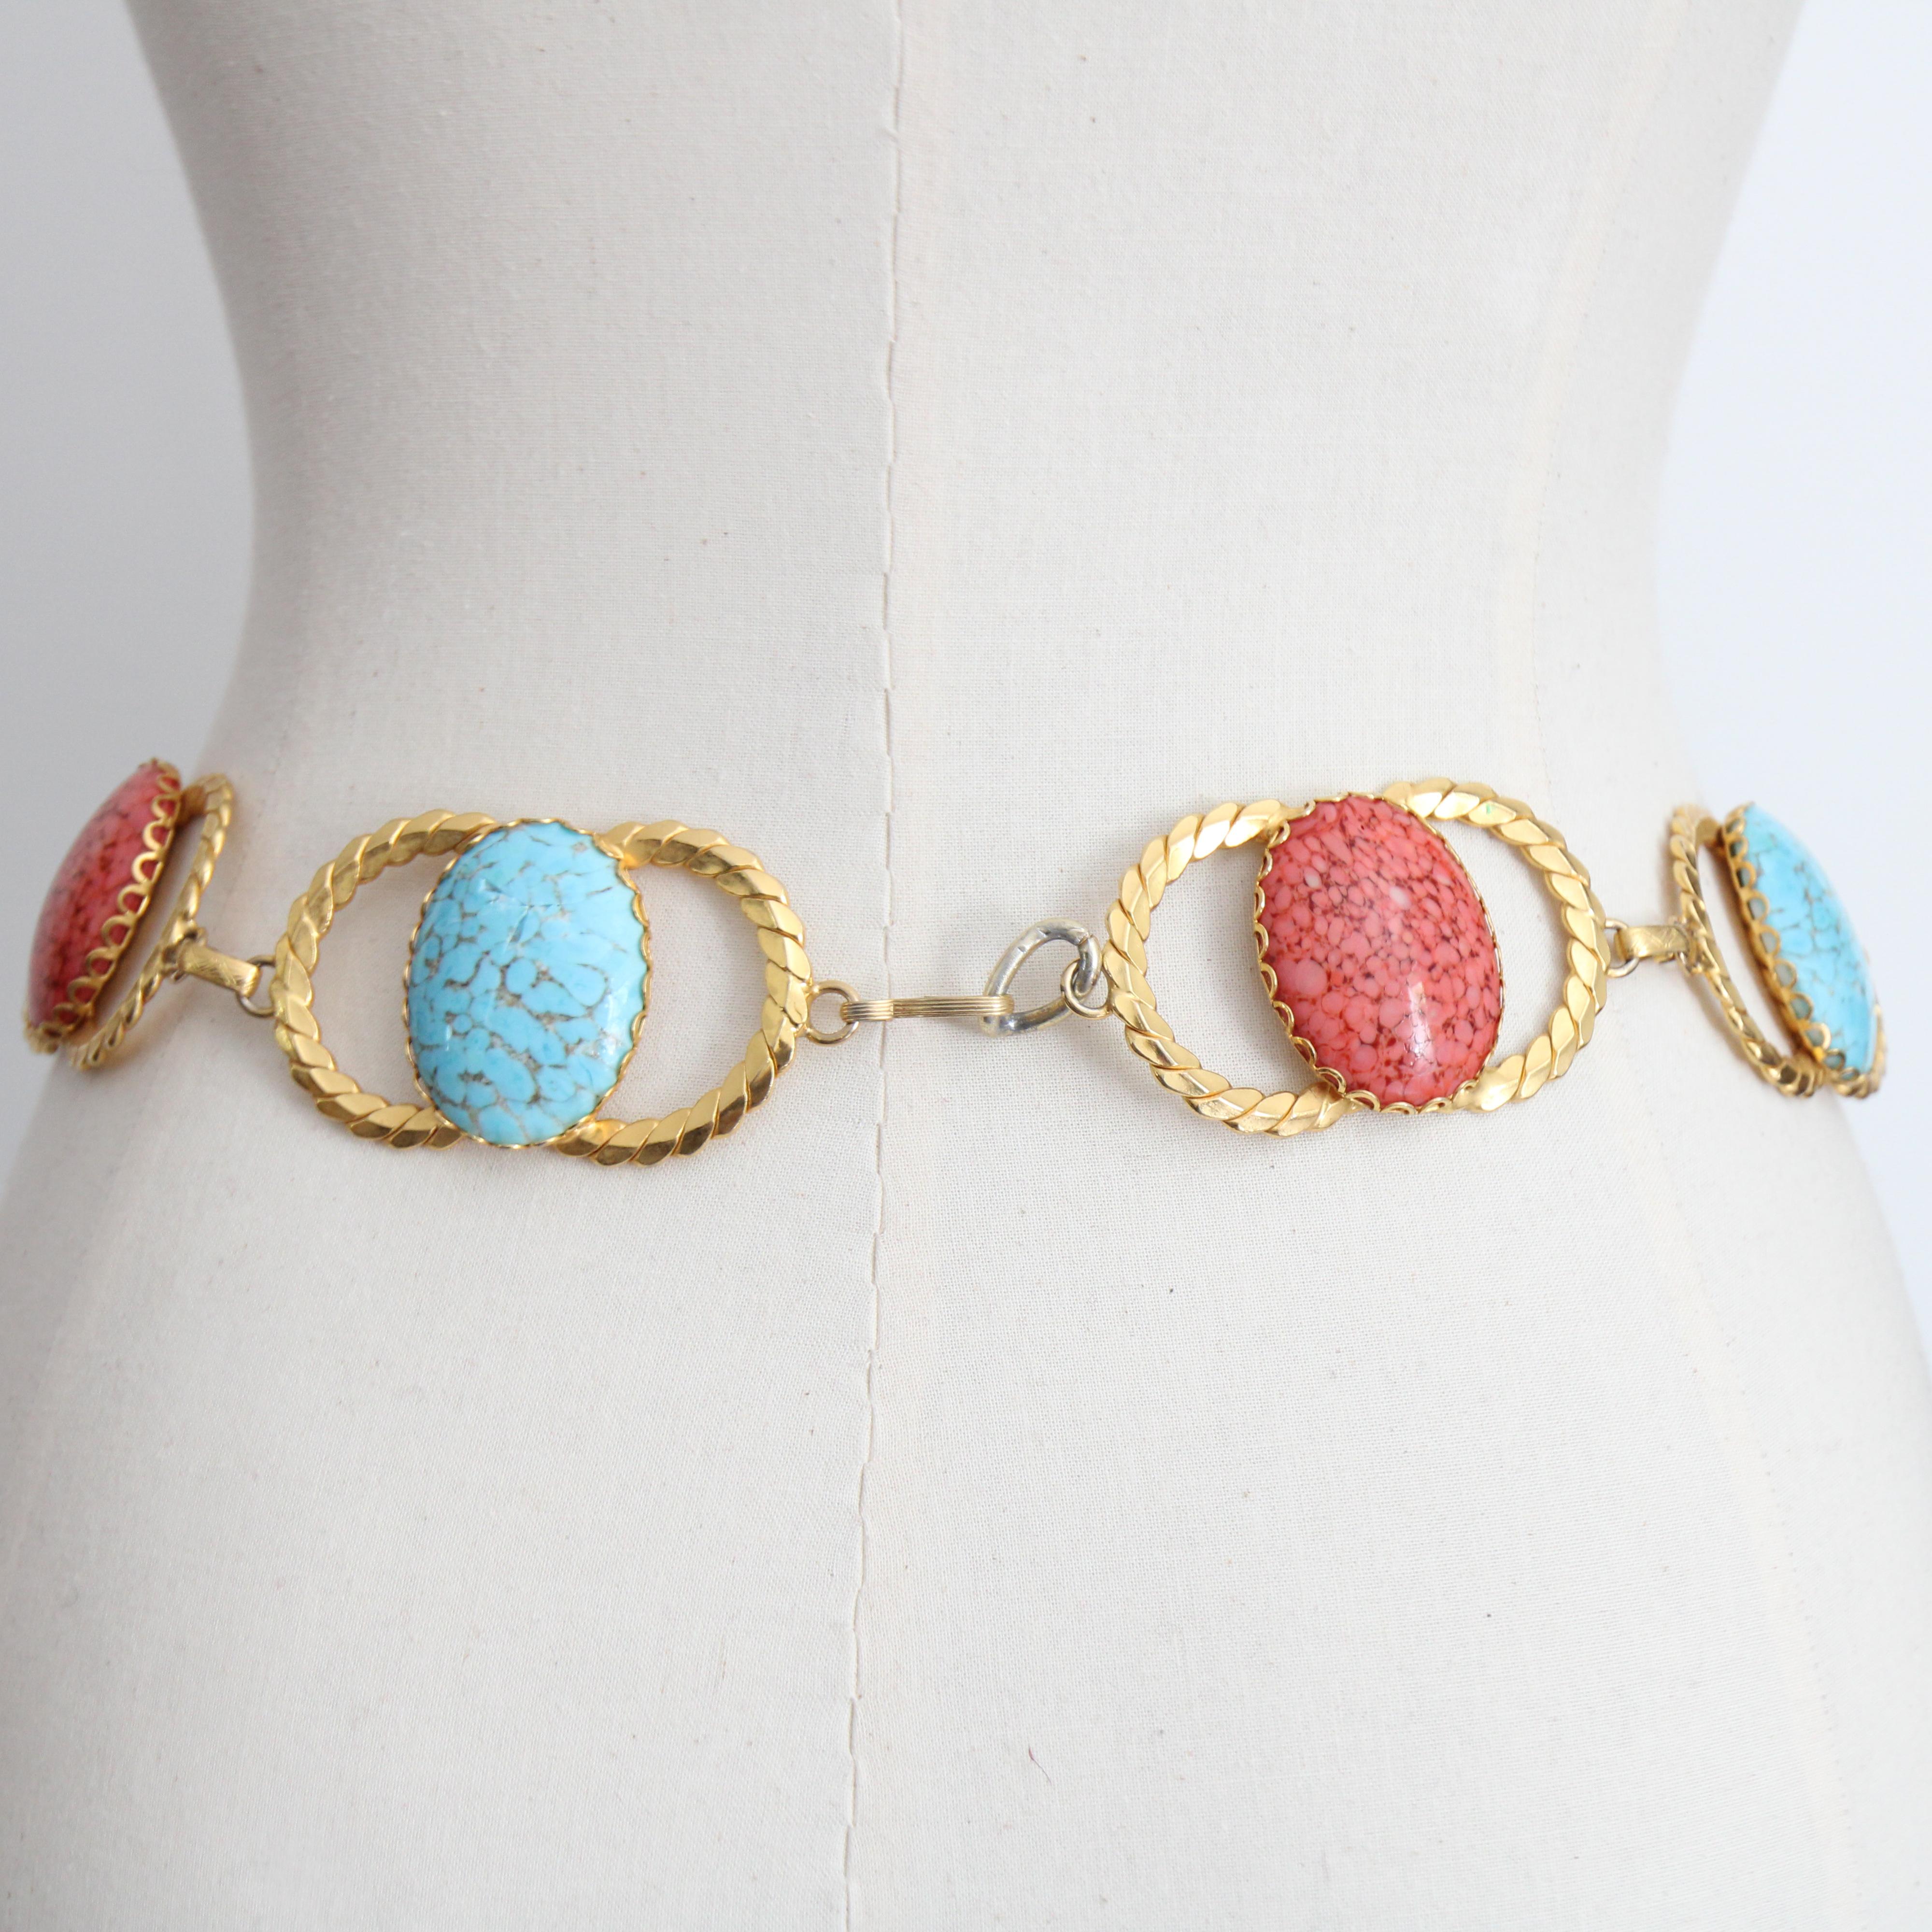 Vintage 1970's coral and turquoise glass cabochons waist chain belt UK 8 US 4 For Sale 6